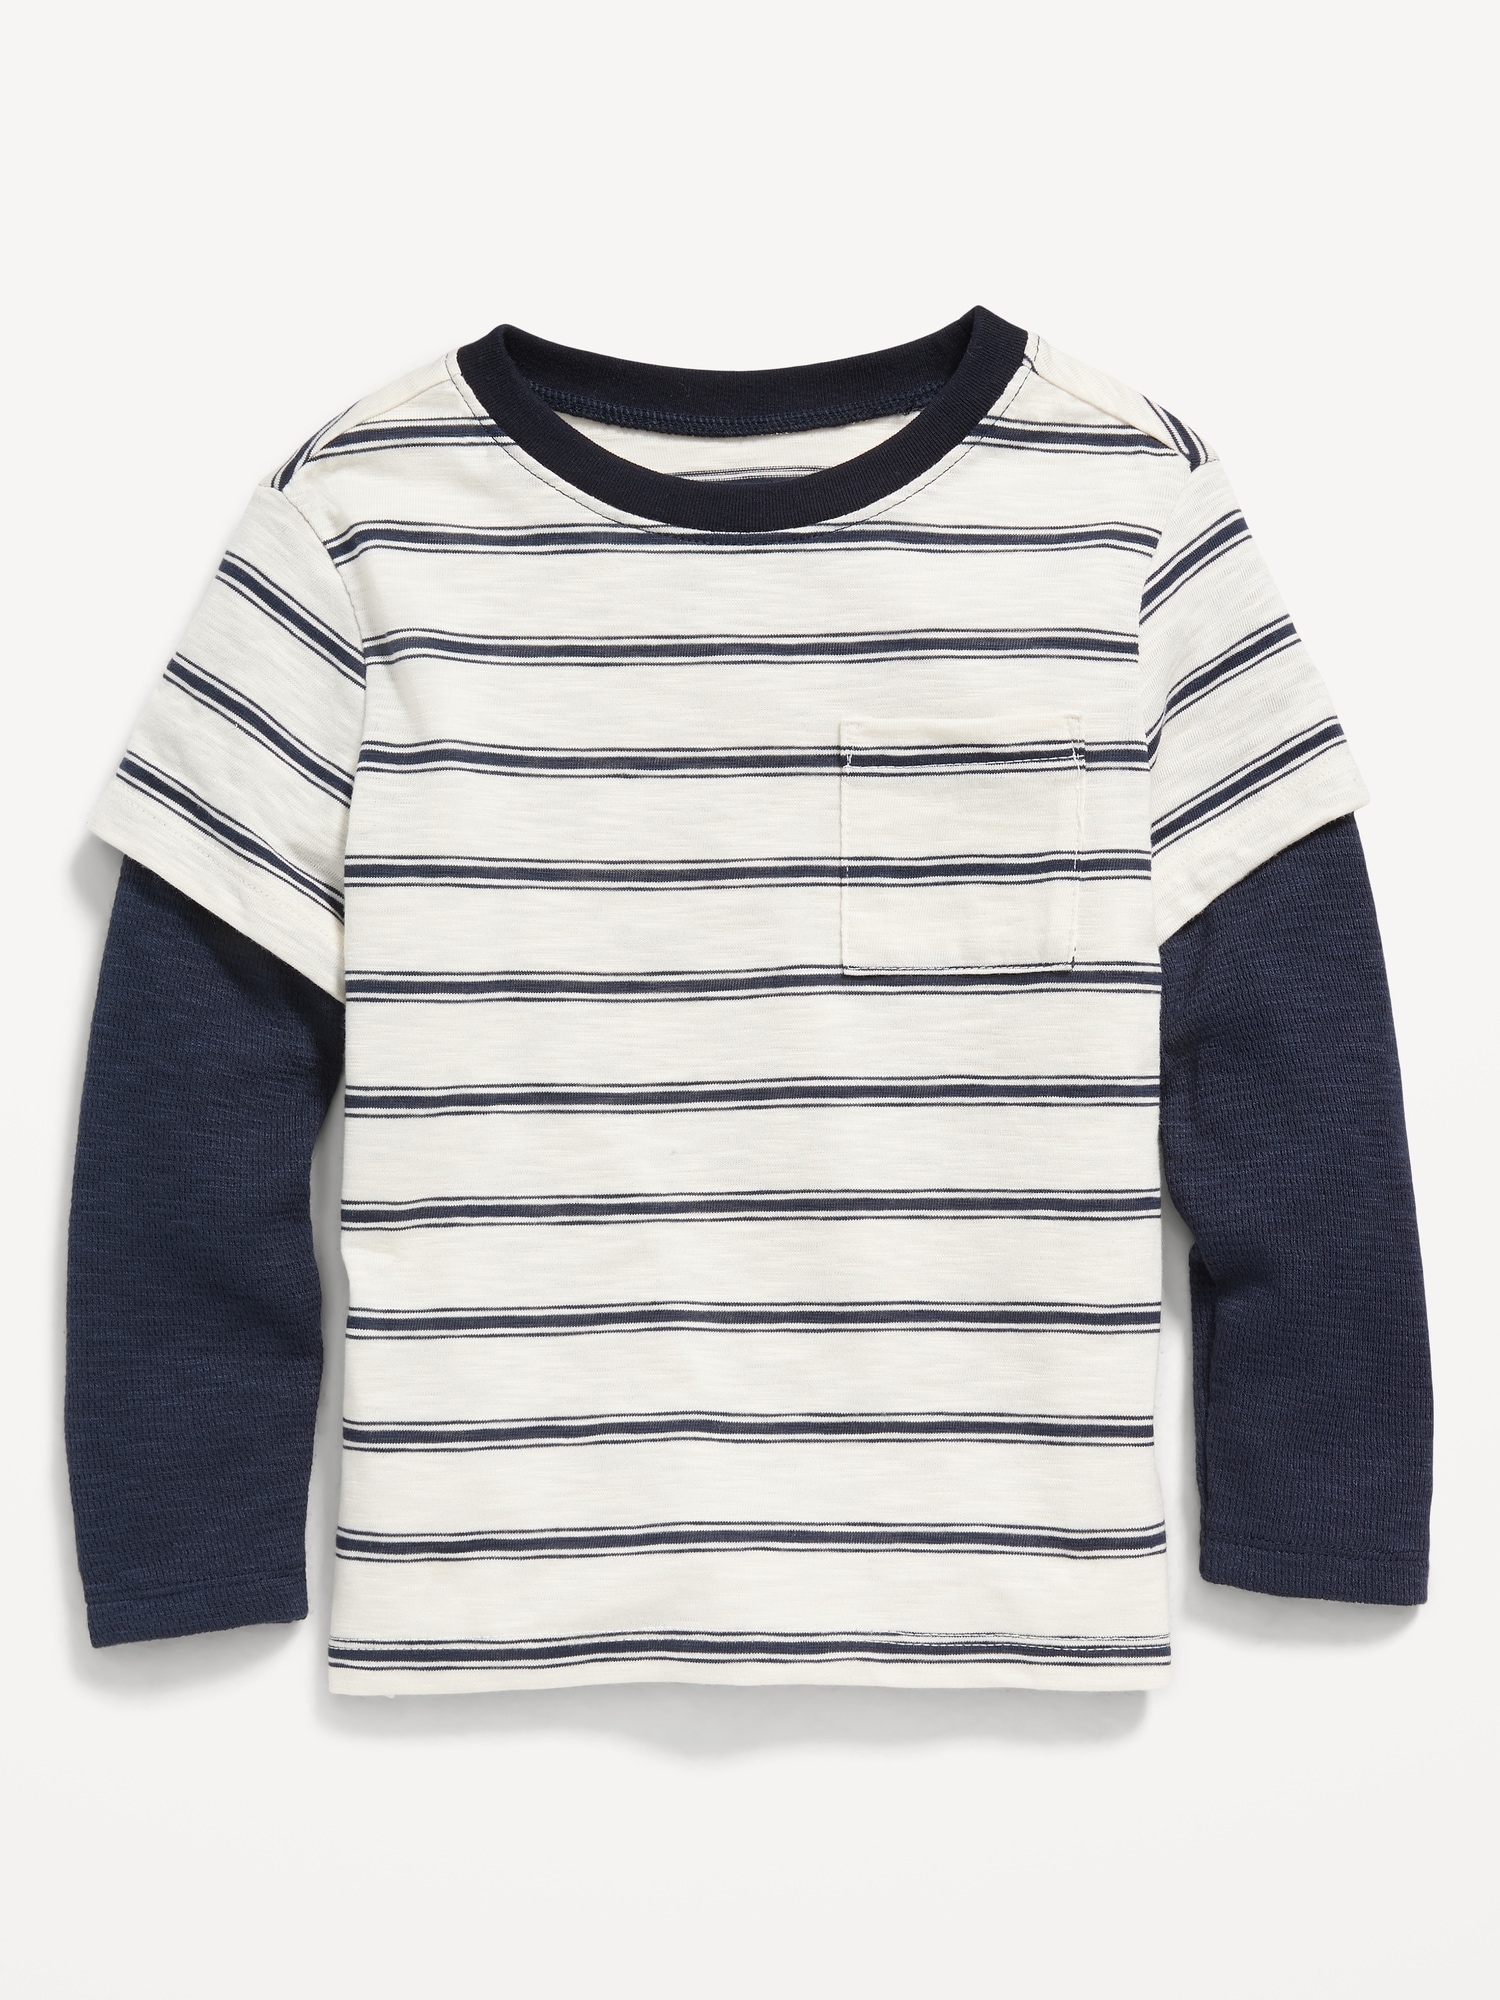 Layered Long-Sleeve T-Shirt for Toddler Boys | Old Navy